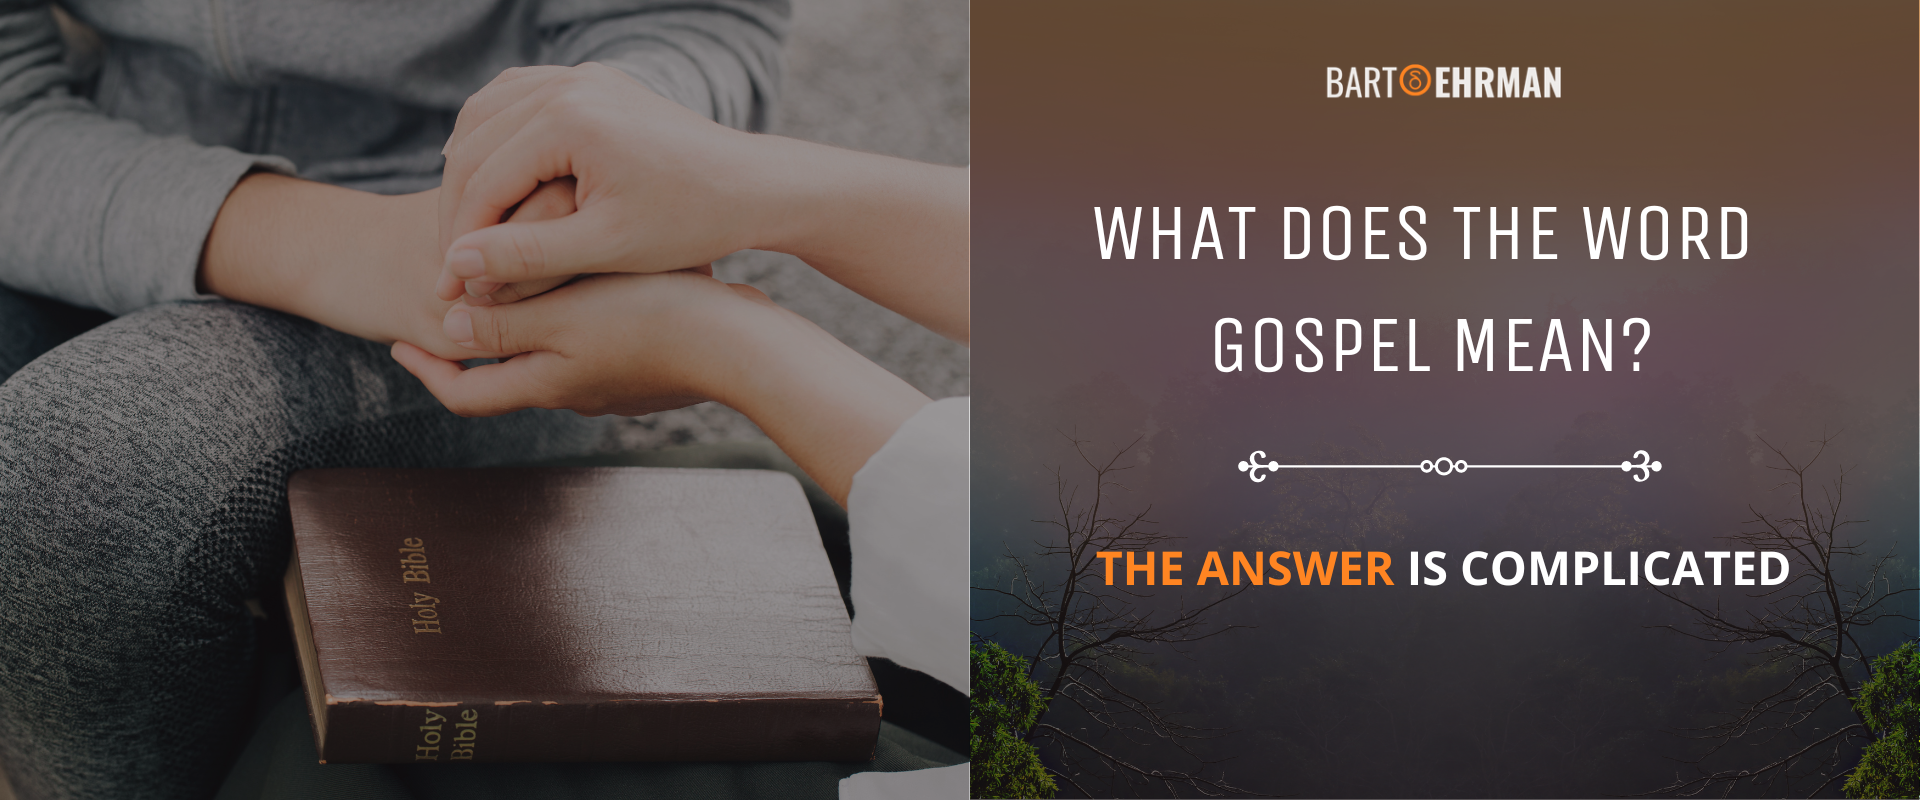 What does the word gospel mean